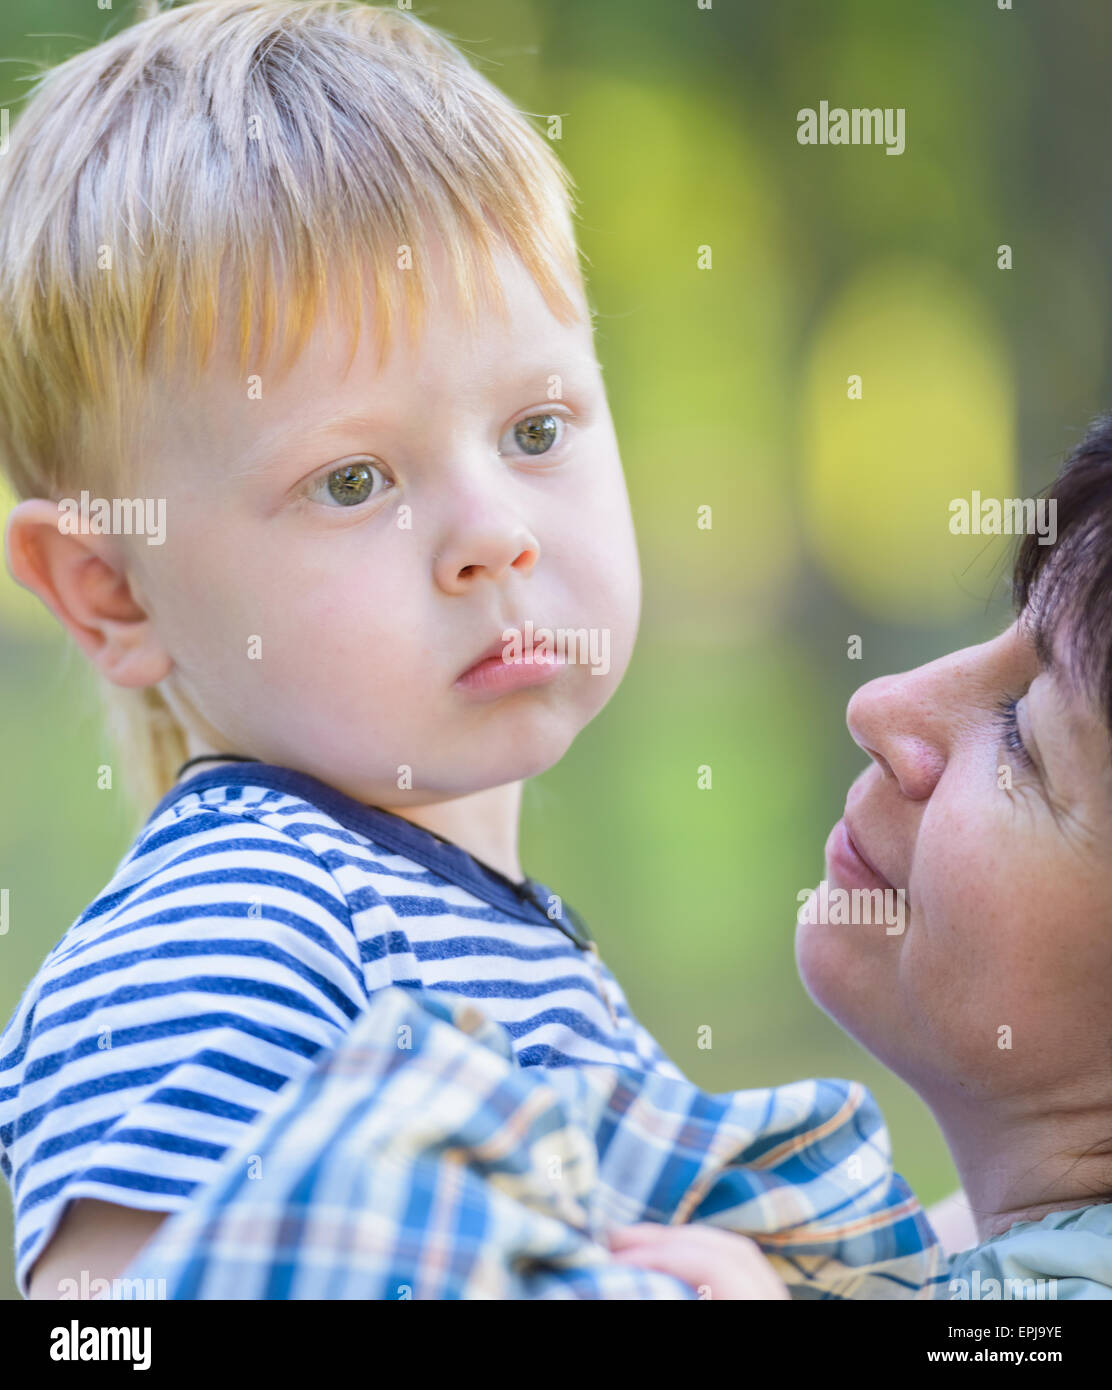 grandmother with her grandson one family Stock Photo